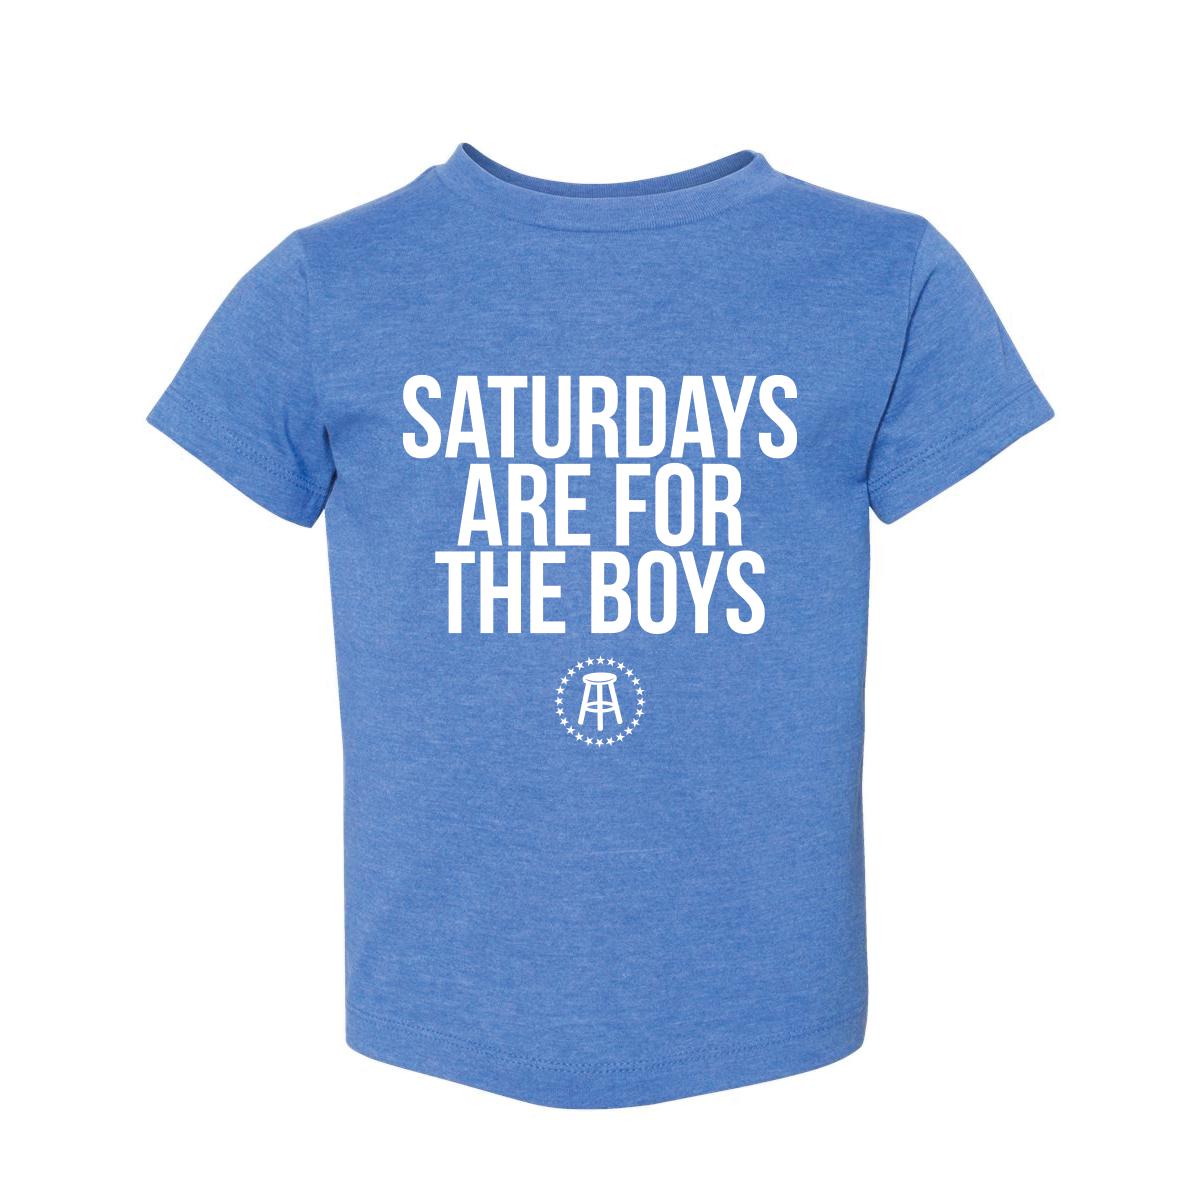 Saturdays Are For The Boys Toddler Tee